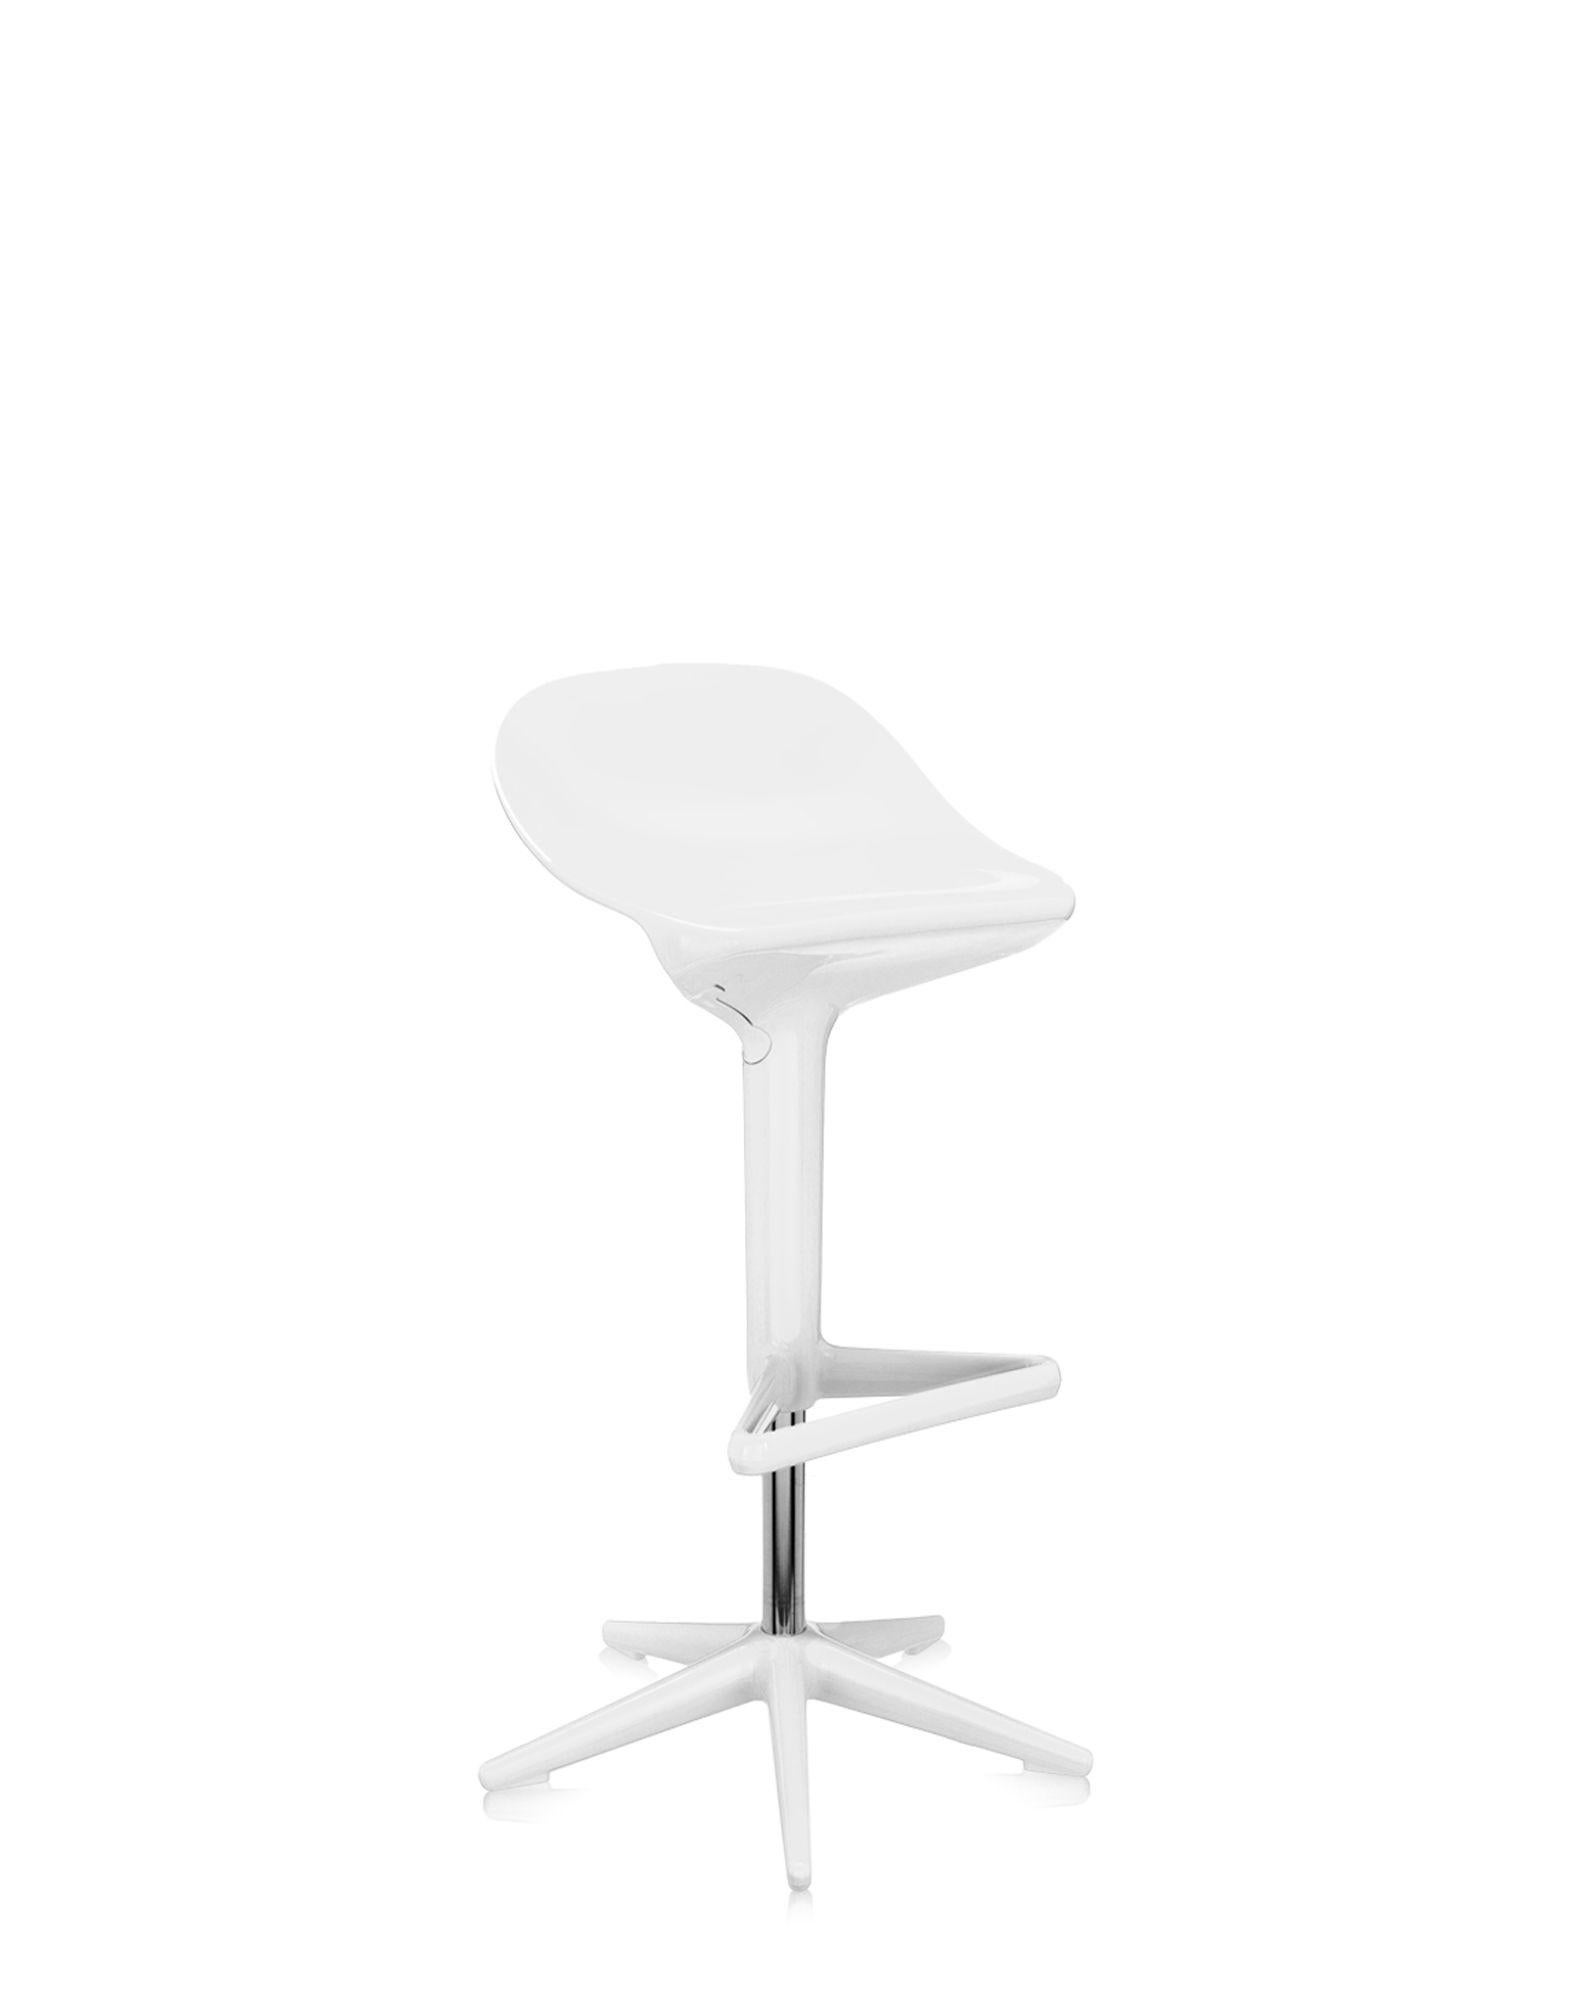 An original stool whose shape is as elastic in appearance as it is in function. The innovation of Spoon consists mainly in attaching the seat to a central support with a specially reinforced curve to guarantee flexibility and comfort. Furthermore,